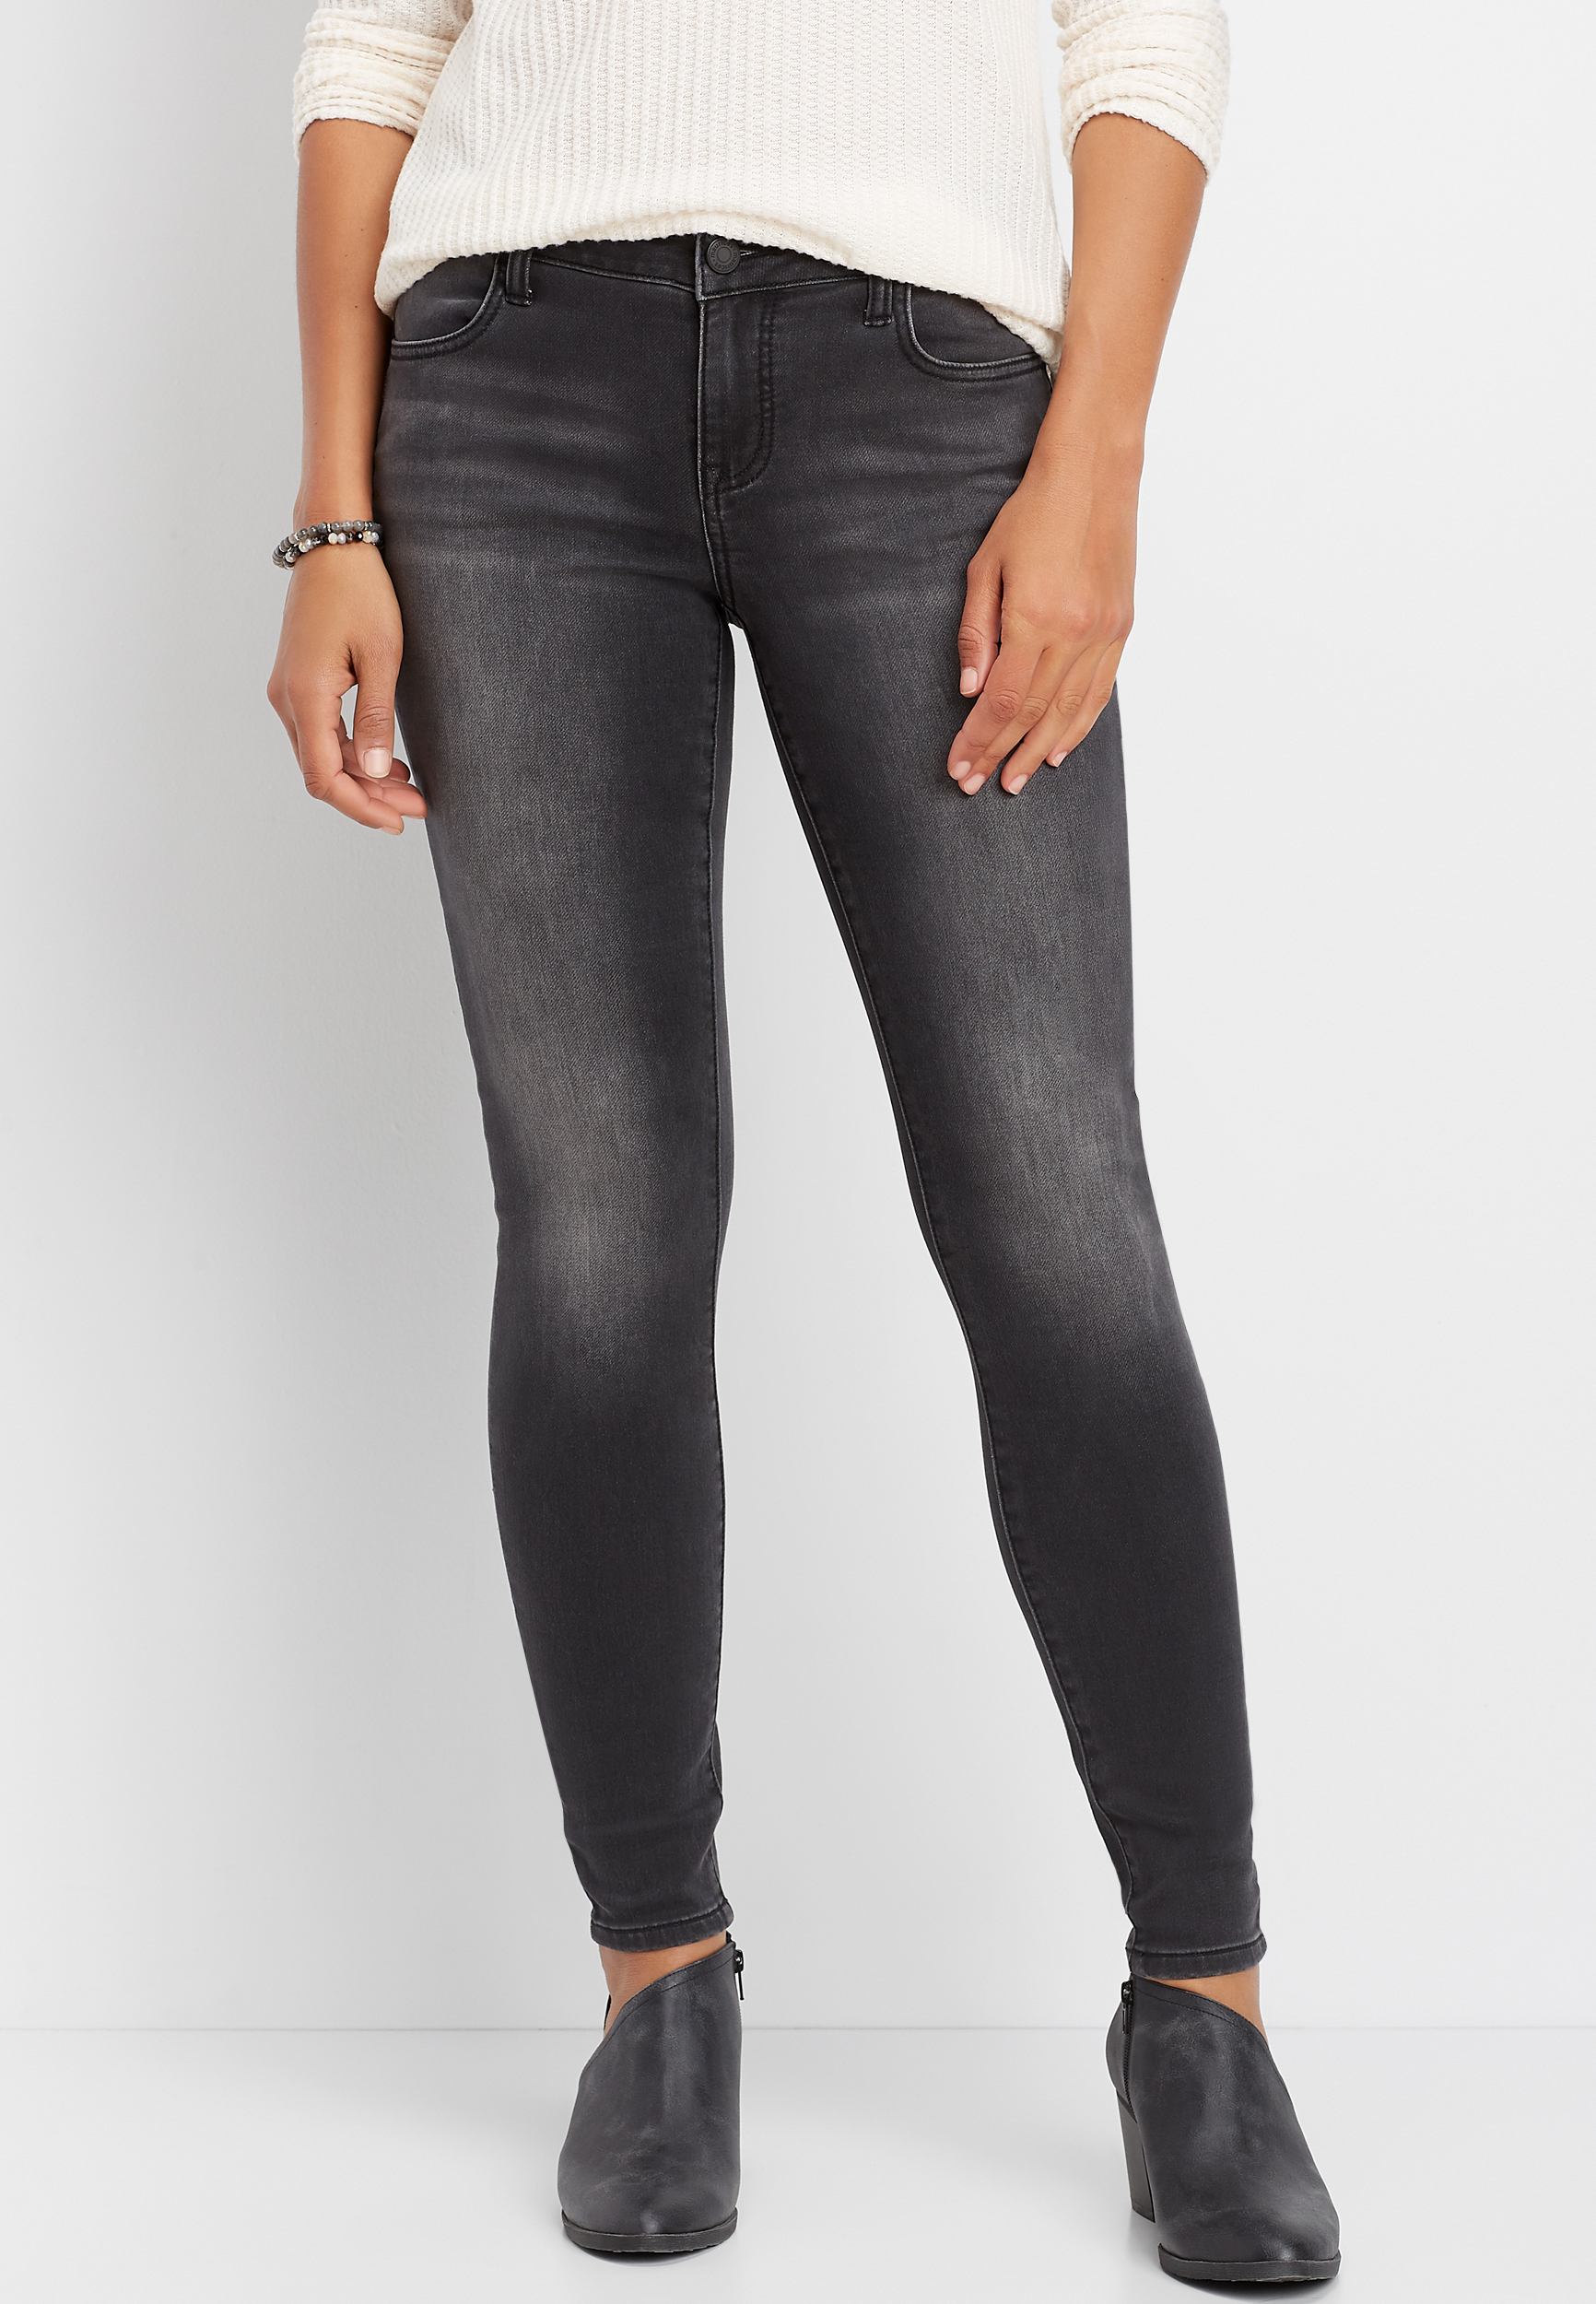 maurices black jeggings